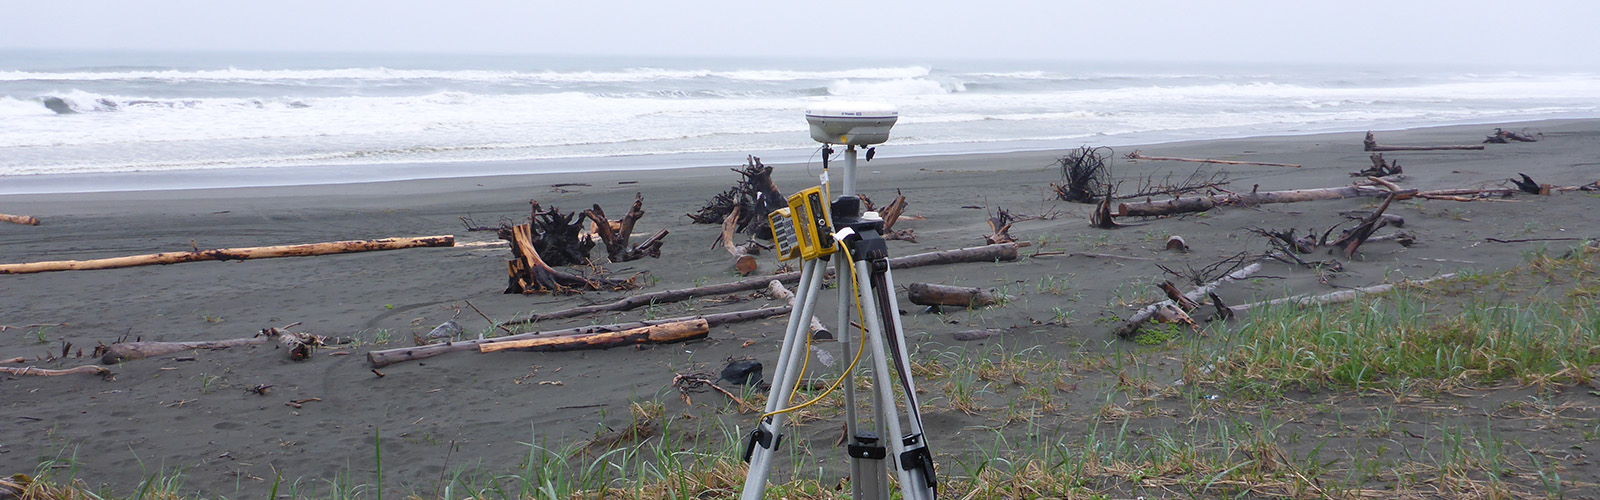 Equipment on a beach filled with driftwood